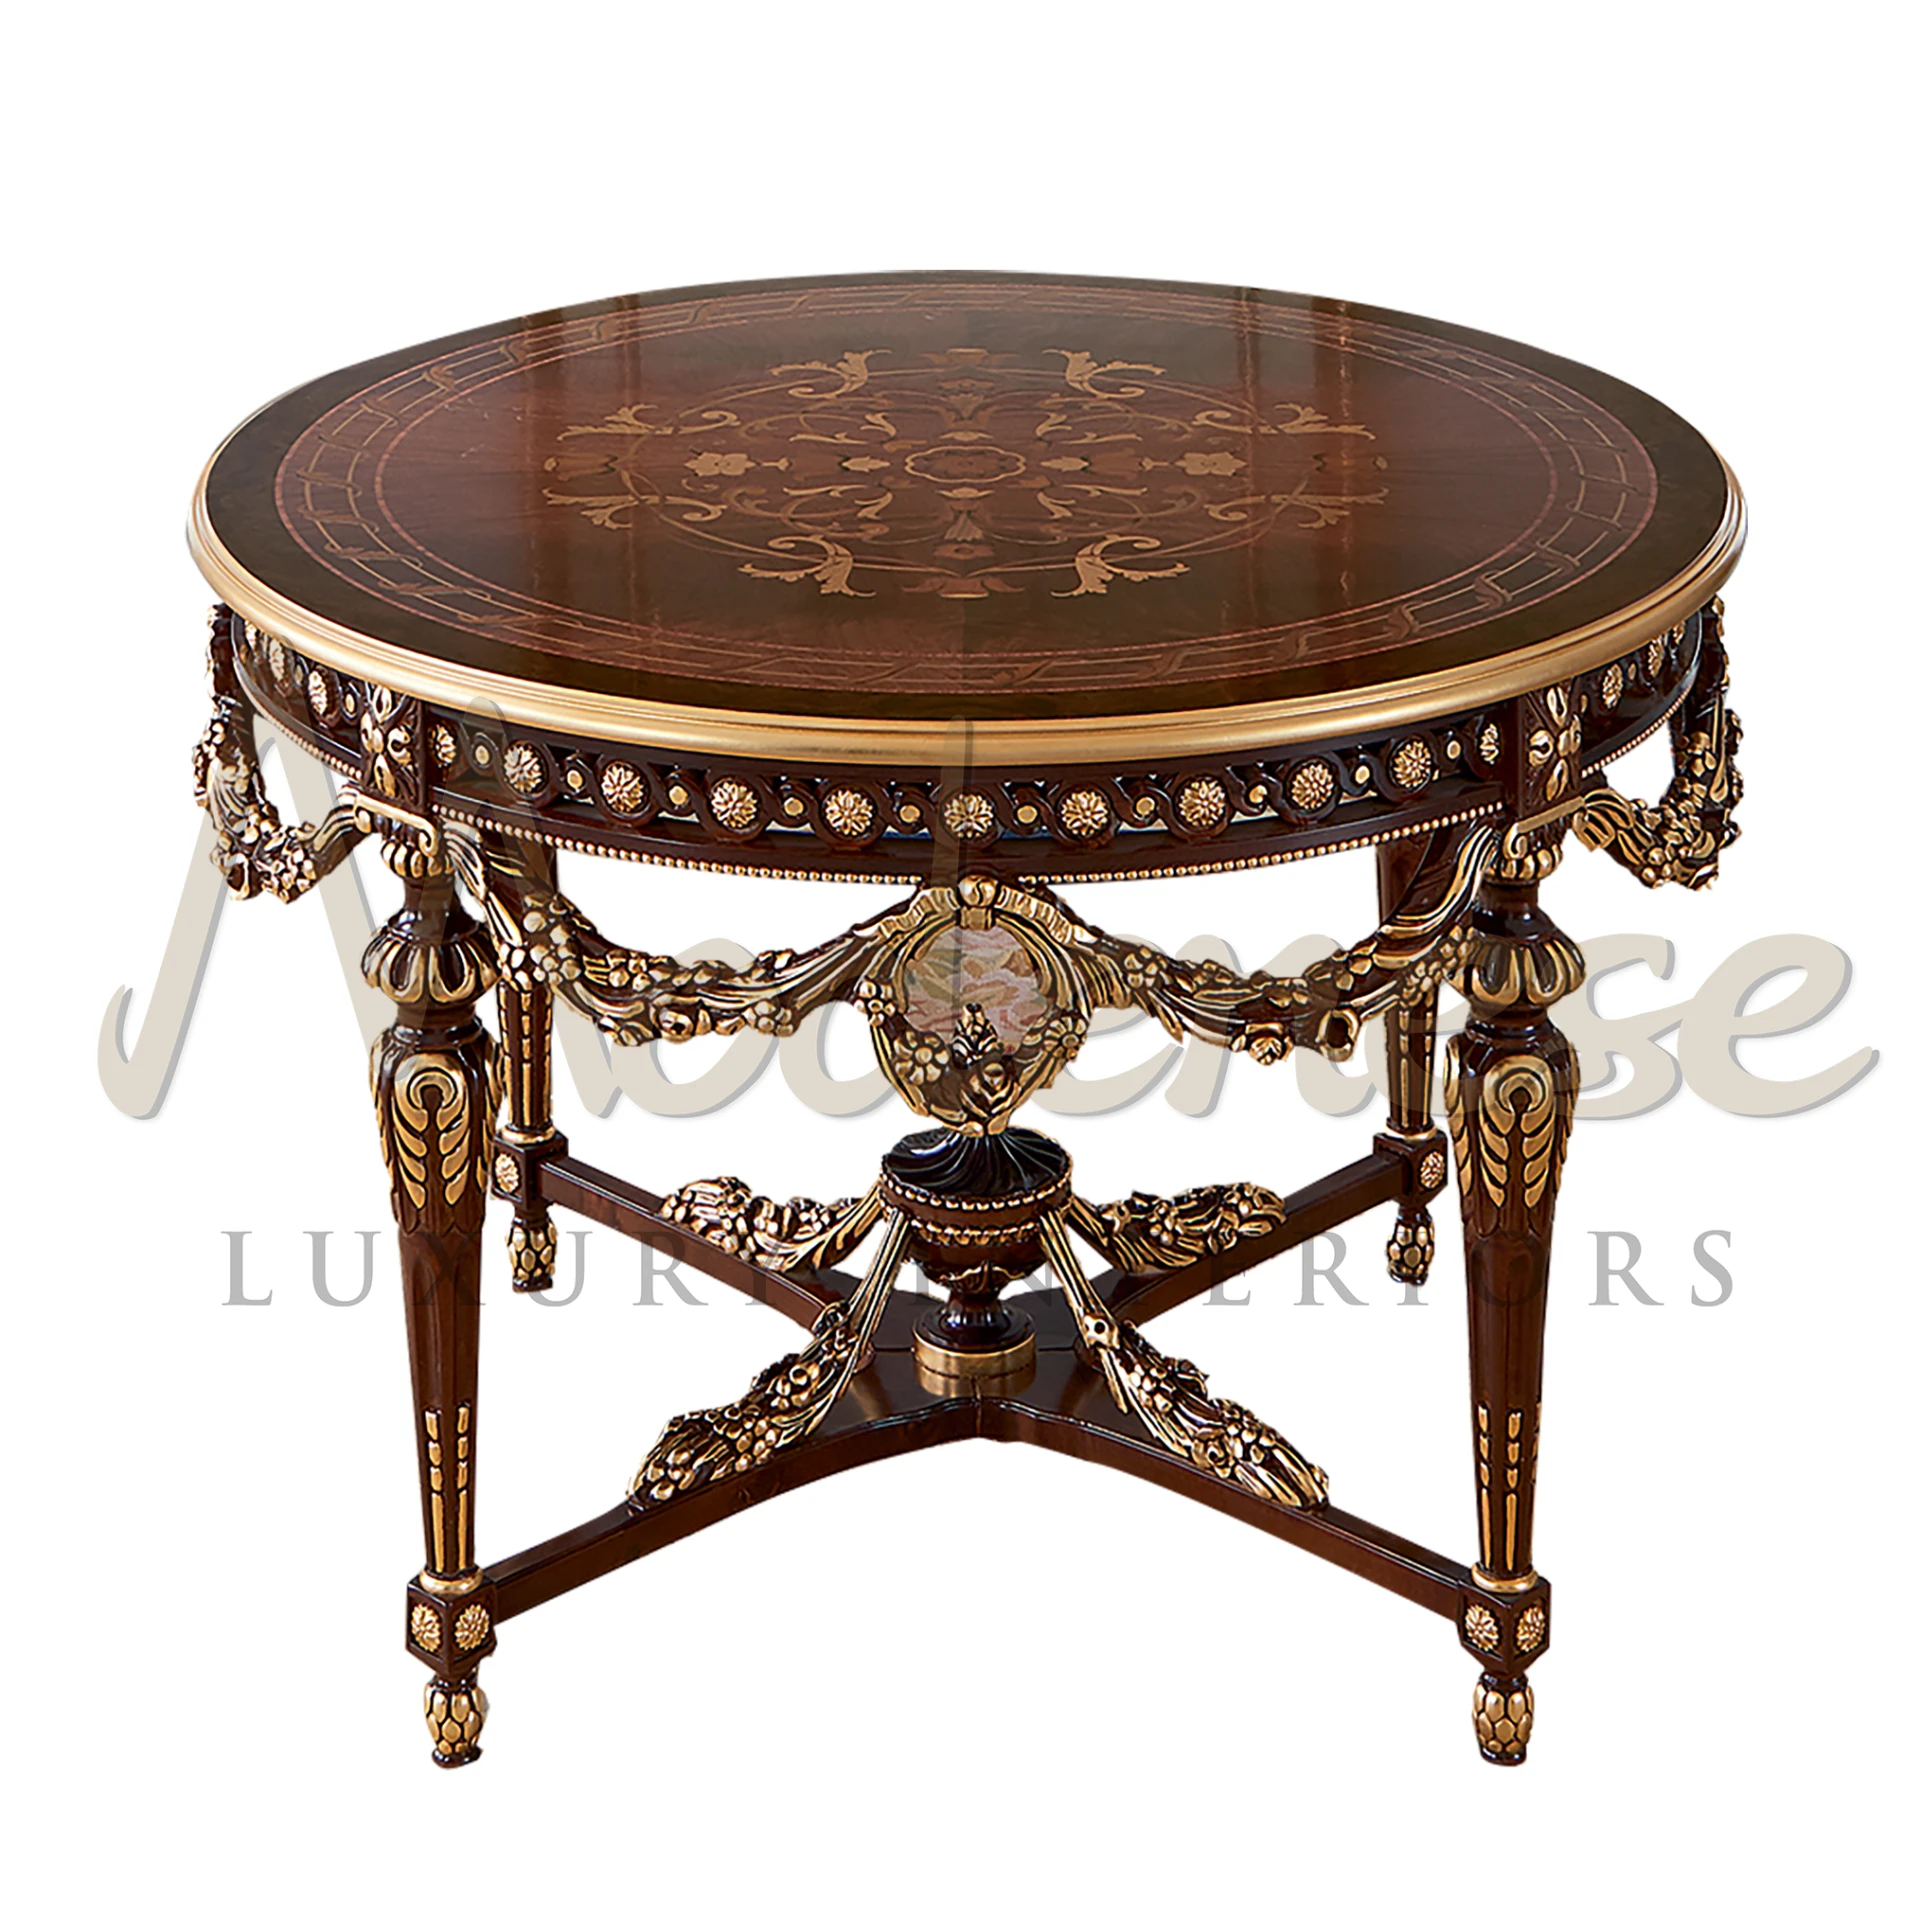 Elegant Classic Figured Central Table with gold leaf details and classic walnut finishing, perfect for luxurious interior design.